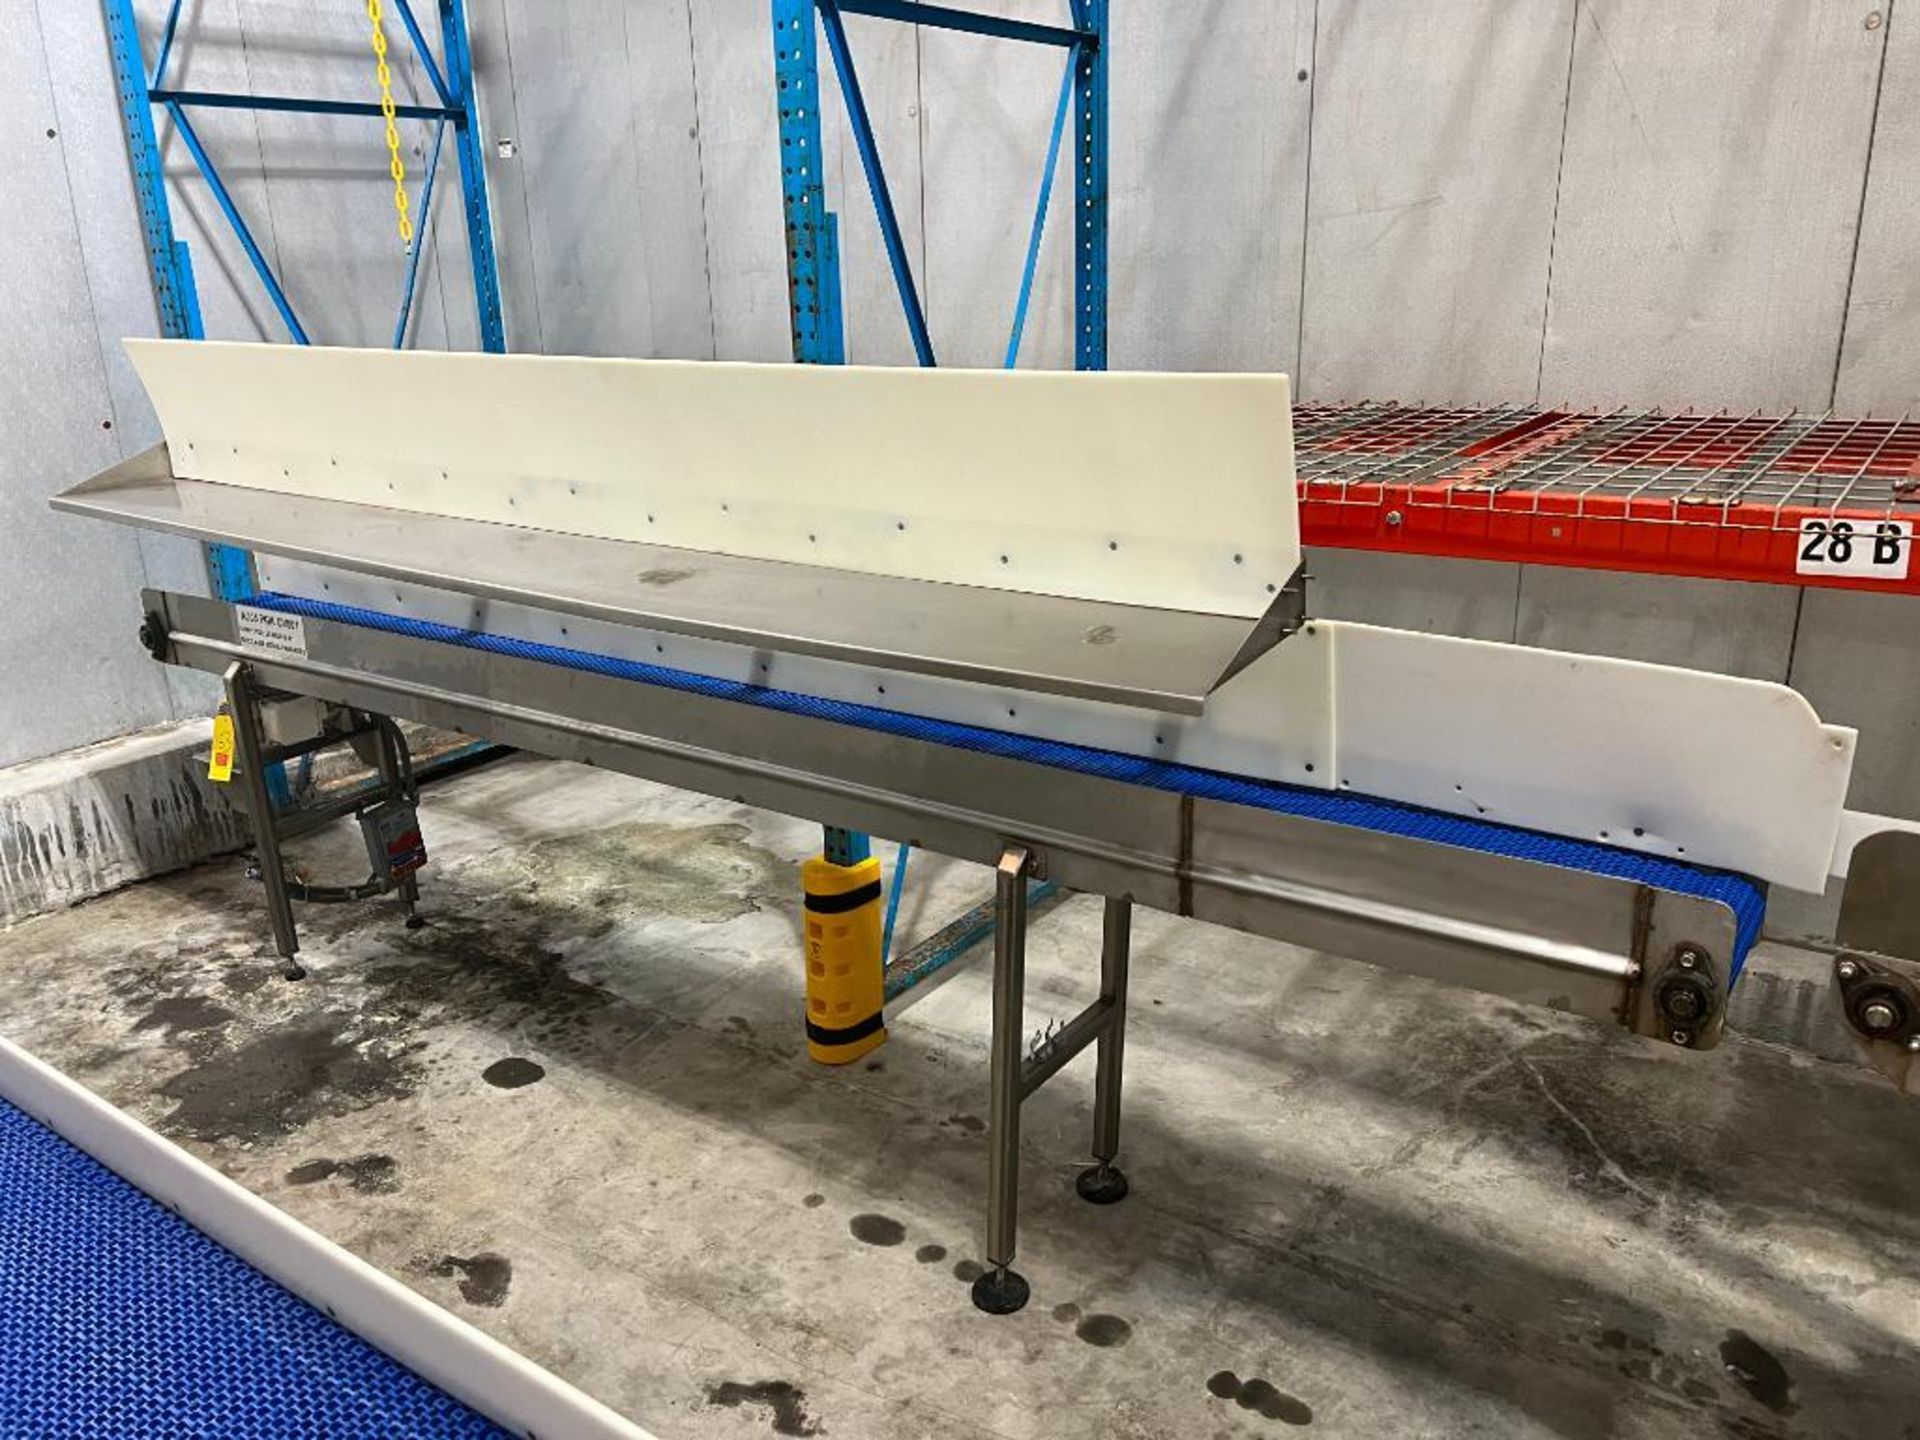 S/S Frame Product Conveyor with Upper Shelf, Dimensions = 142" Length x 12" Width - Rigging Fee: $15